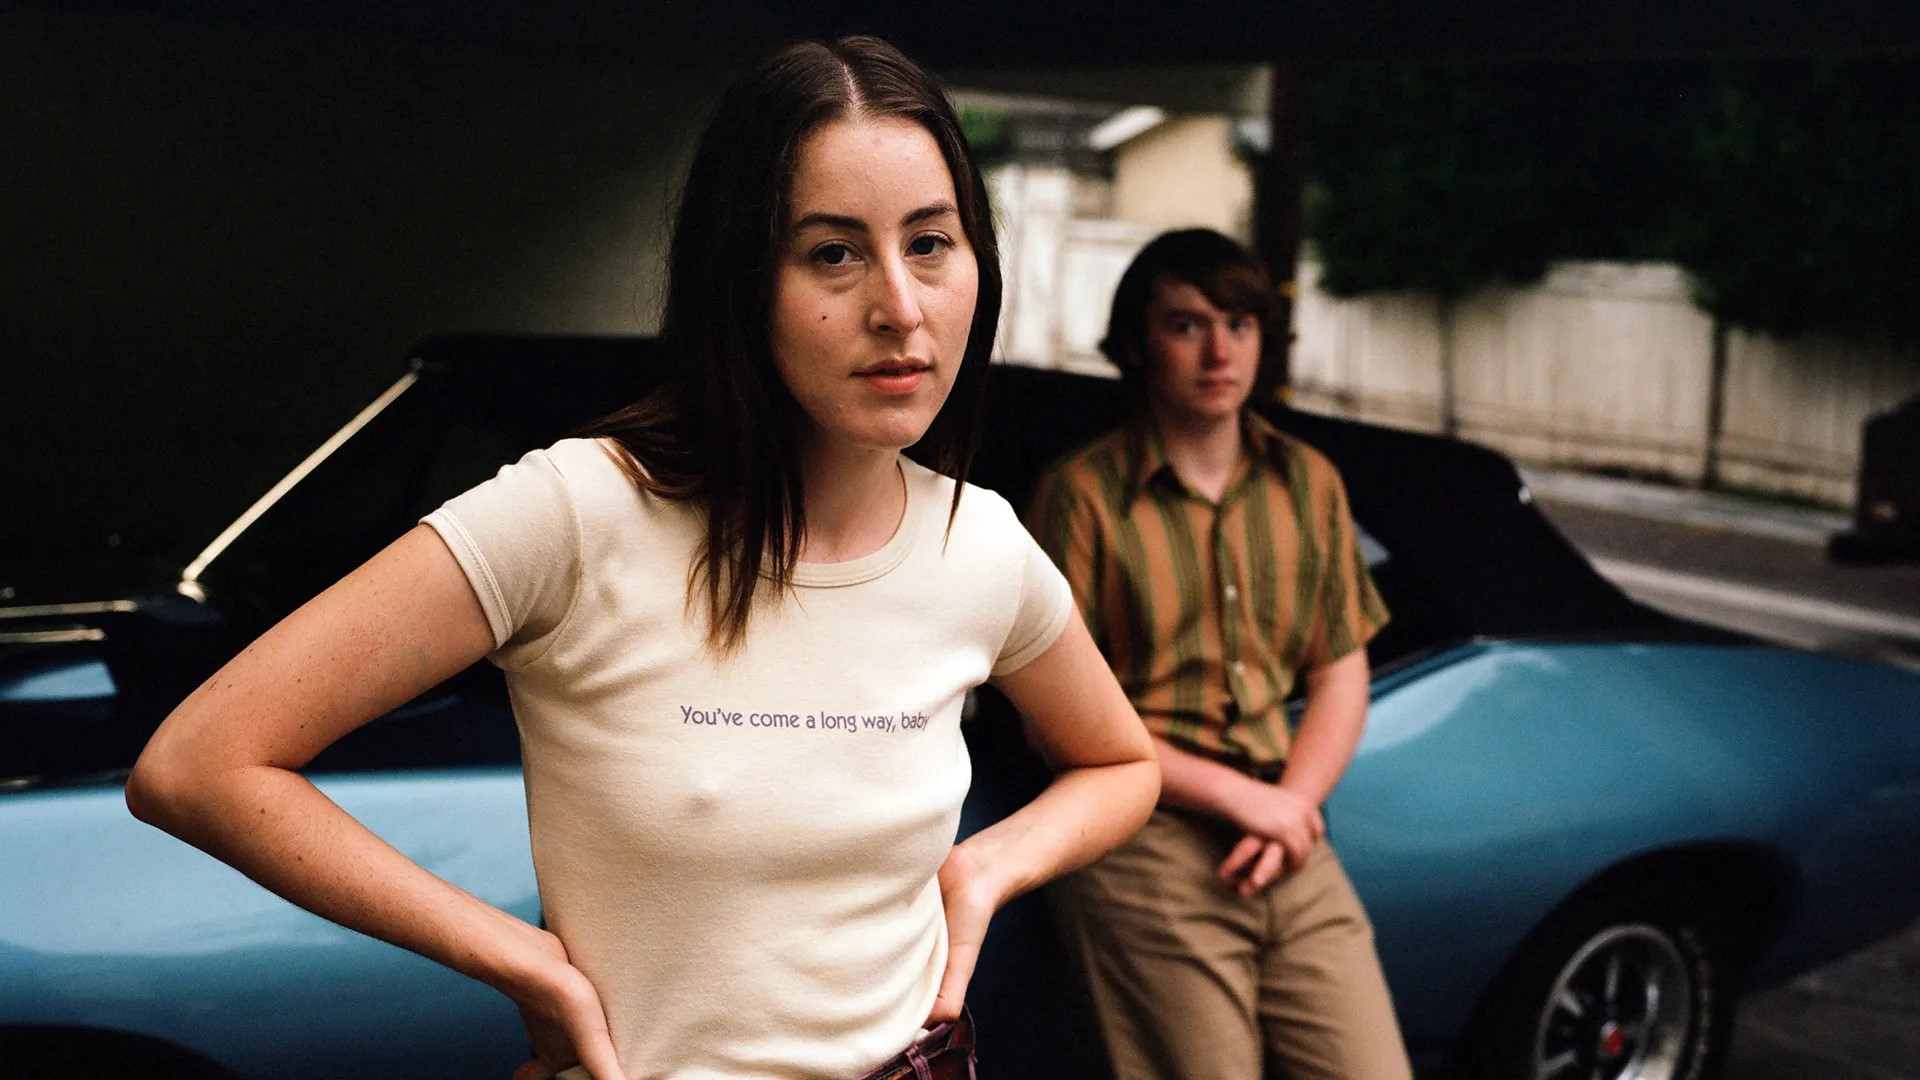 Alana Haim on Her Role in Offbeat Coming-of-Age Film, Licorice Pizza |  AnOther